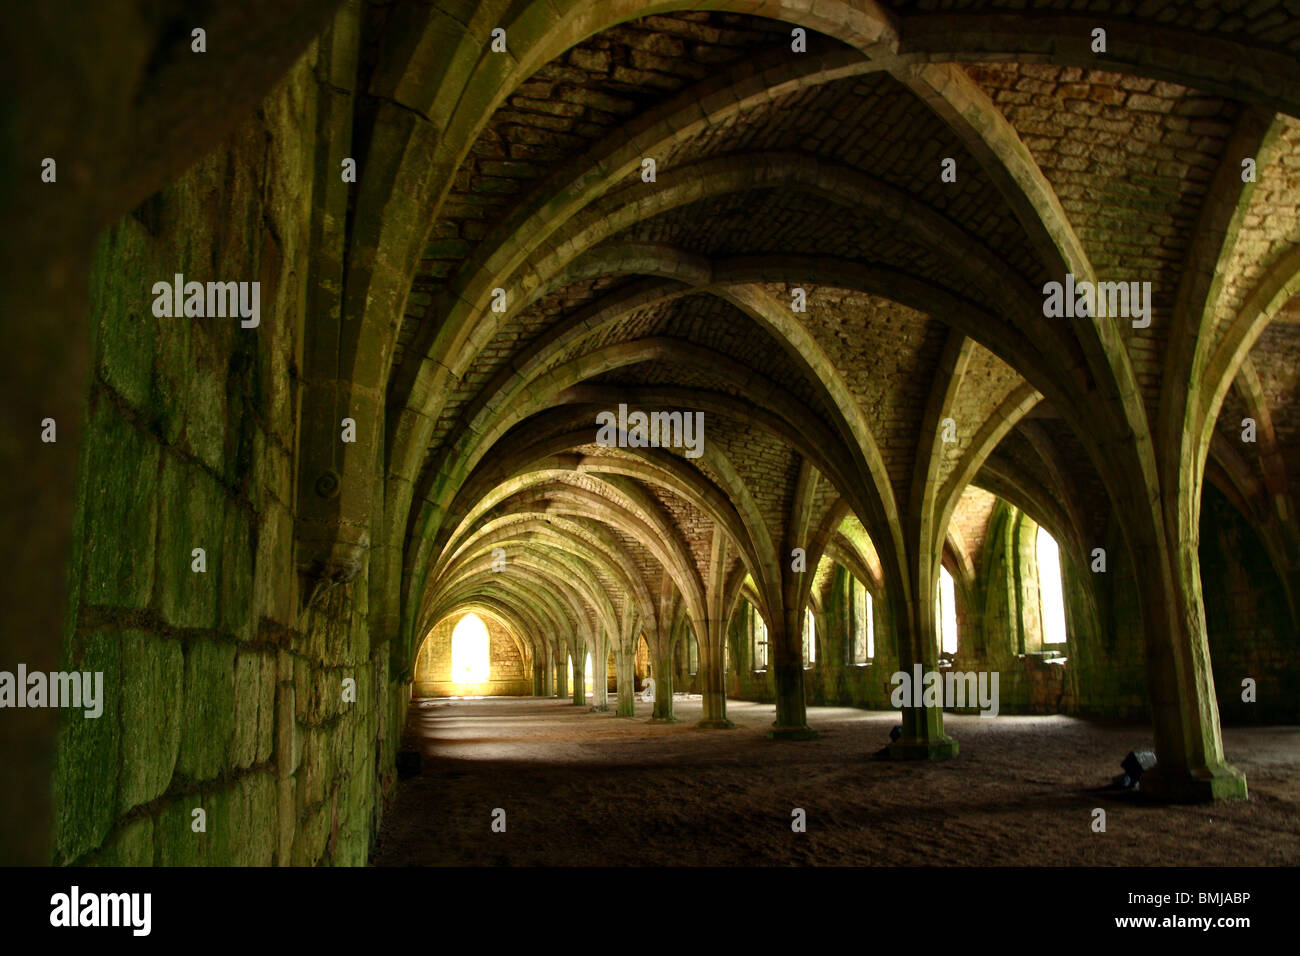 Fountains Abbey, Ripon, Nth Yorkshire. Cistercian Abbey dating from 1132. This shows the storage area for food etc. Stock Photo